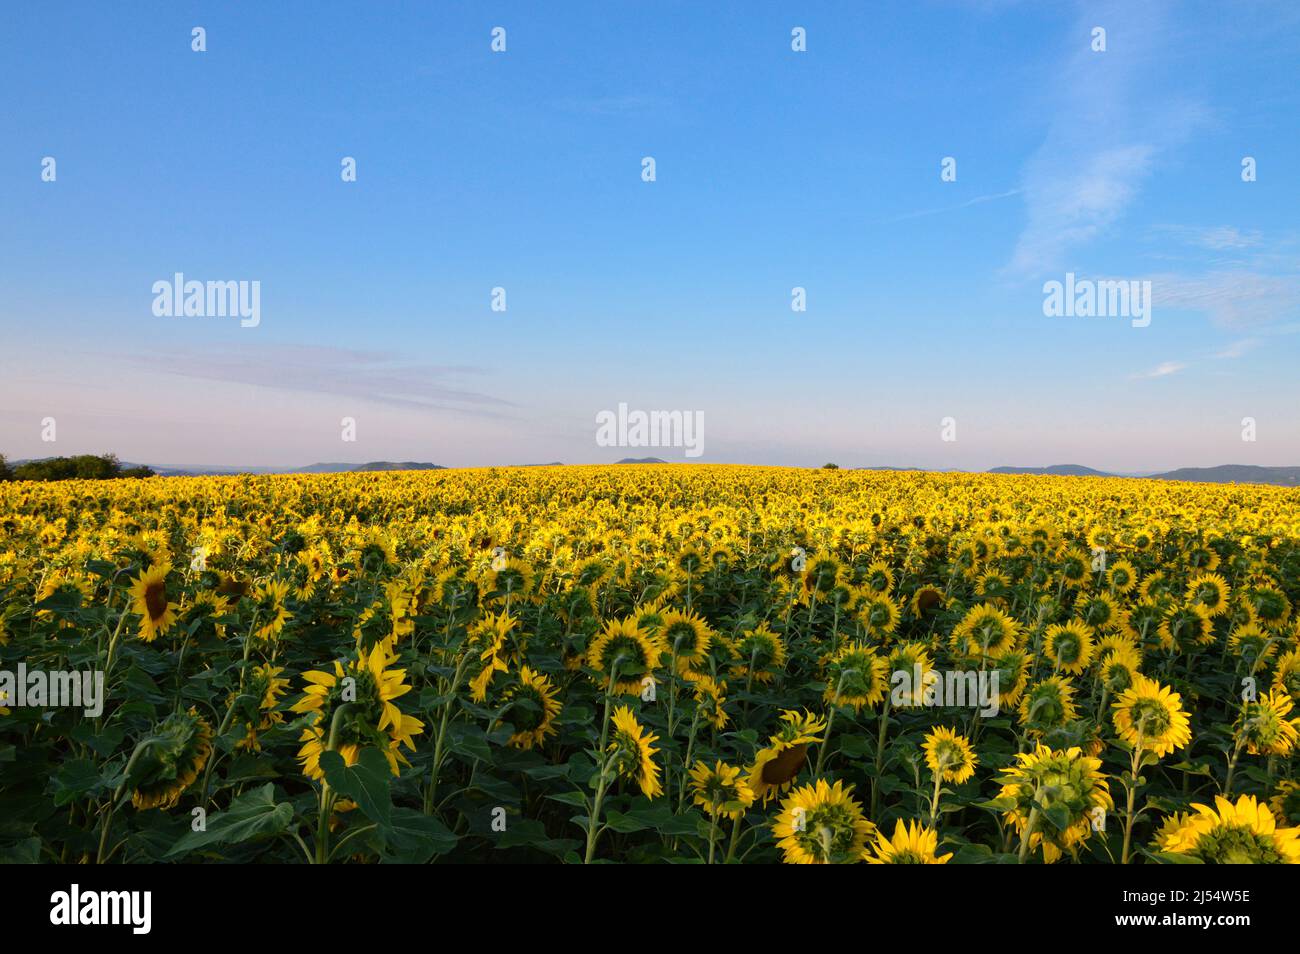 A beautiful sunflower field at dusk for making sunflower oil or biofuel. Stock Photo